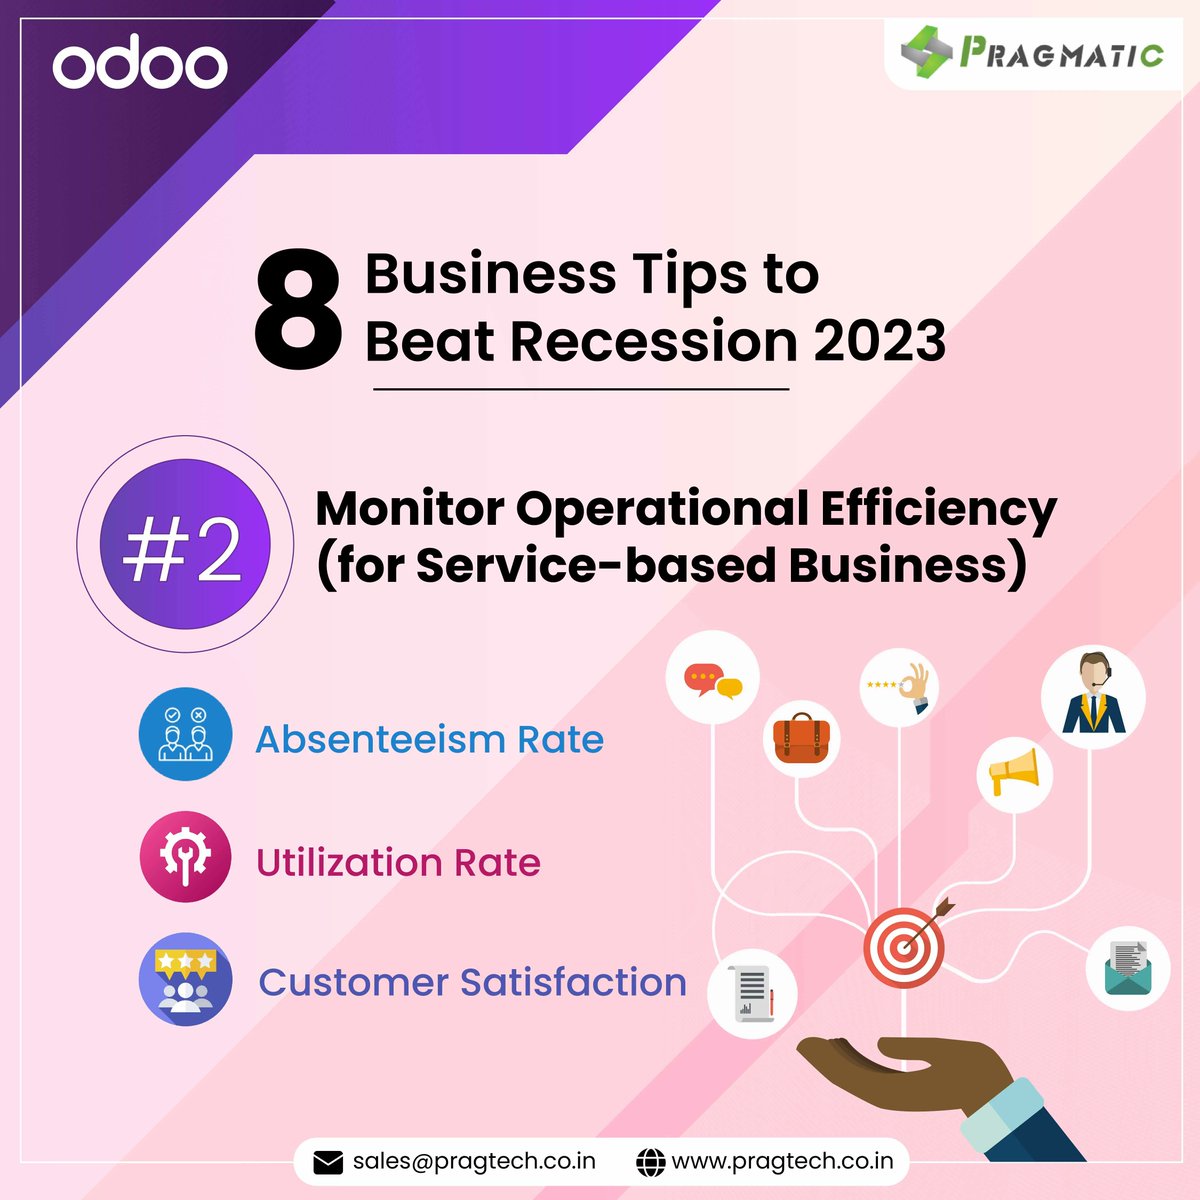 Read full-length blog-buff.ly/3vhOGEF
 
Talk To Our Experts-buff.ly/3dJCDL7

#pragtech #recession #odoo #Odoo16 #customerservice #bulletproofbusiness #recession2023 #recessionproof #recessionproofbusiness #promptservice #economy #EconomyCrisis #recessiontips